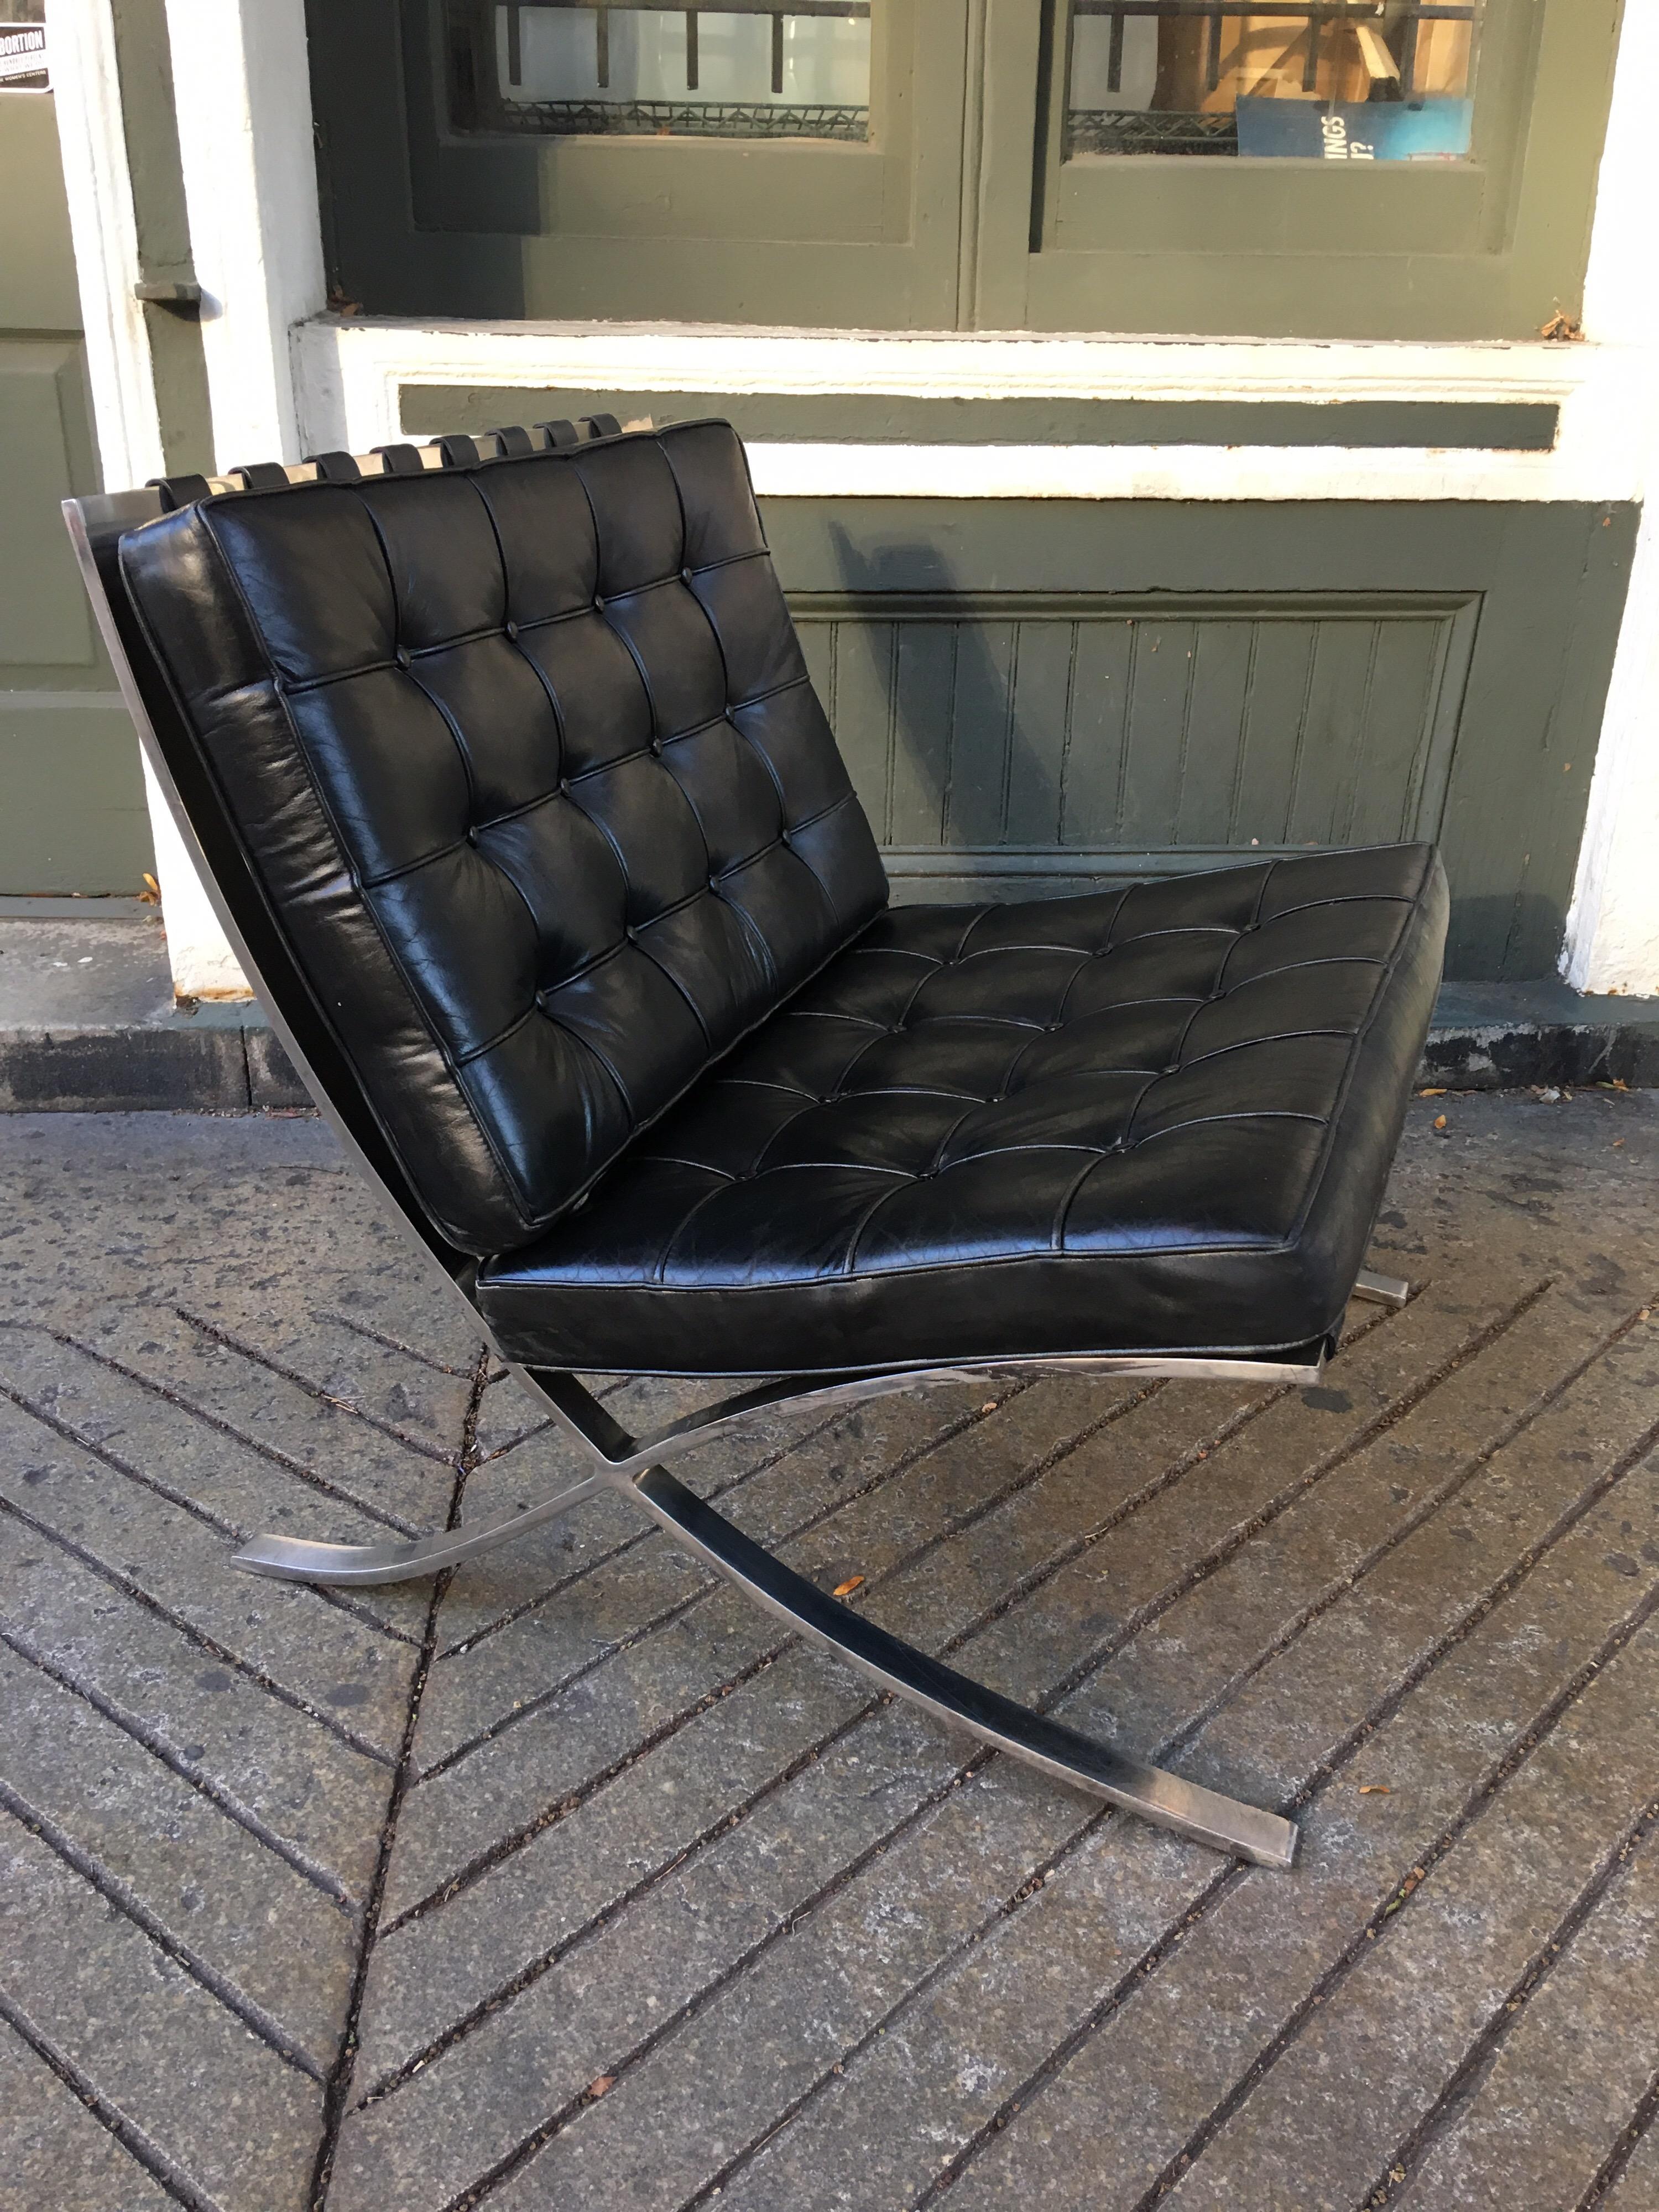 Ludwig Mies van der Rohe Barcelona chair in black leather and stainless steel. Produced by Knoll, this chair dates to the late 1970s. Leather shows small amount of wear, but overall presents very well. Classic comfortable chair!